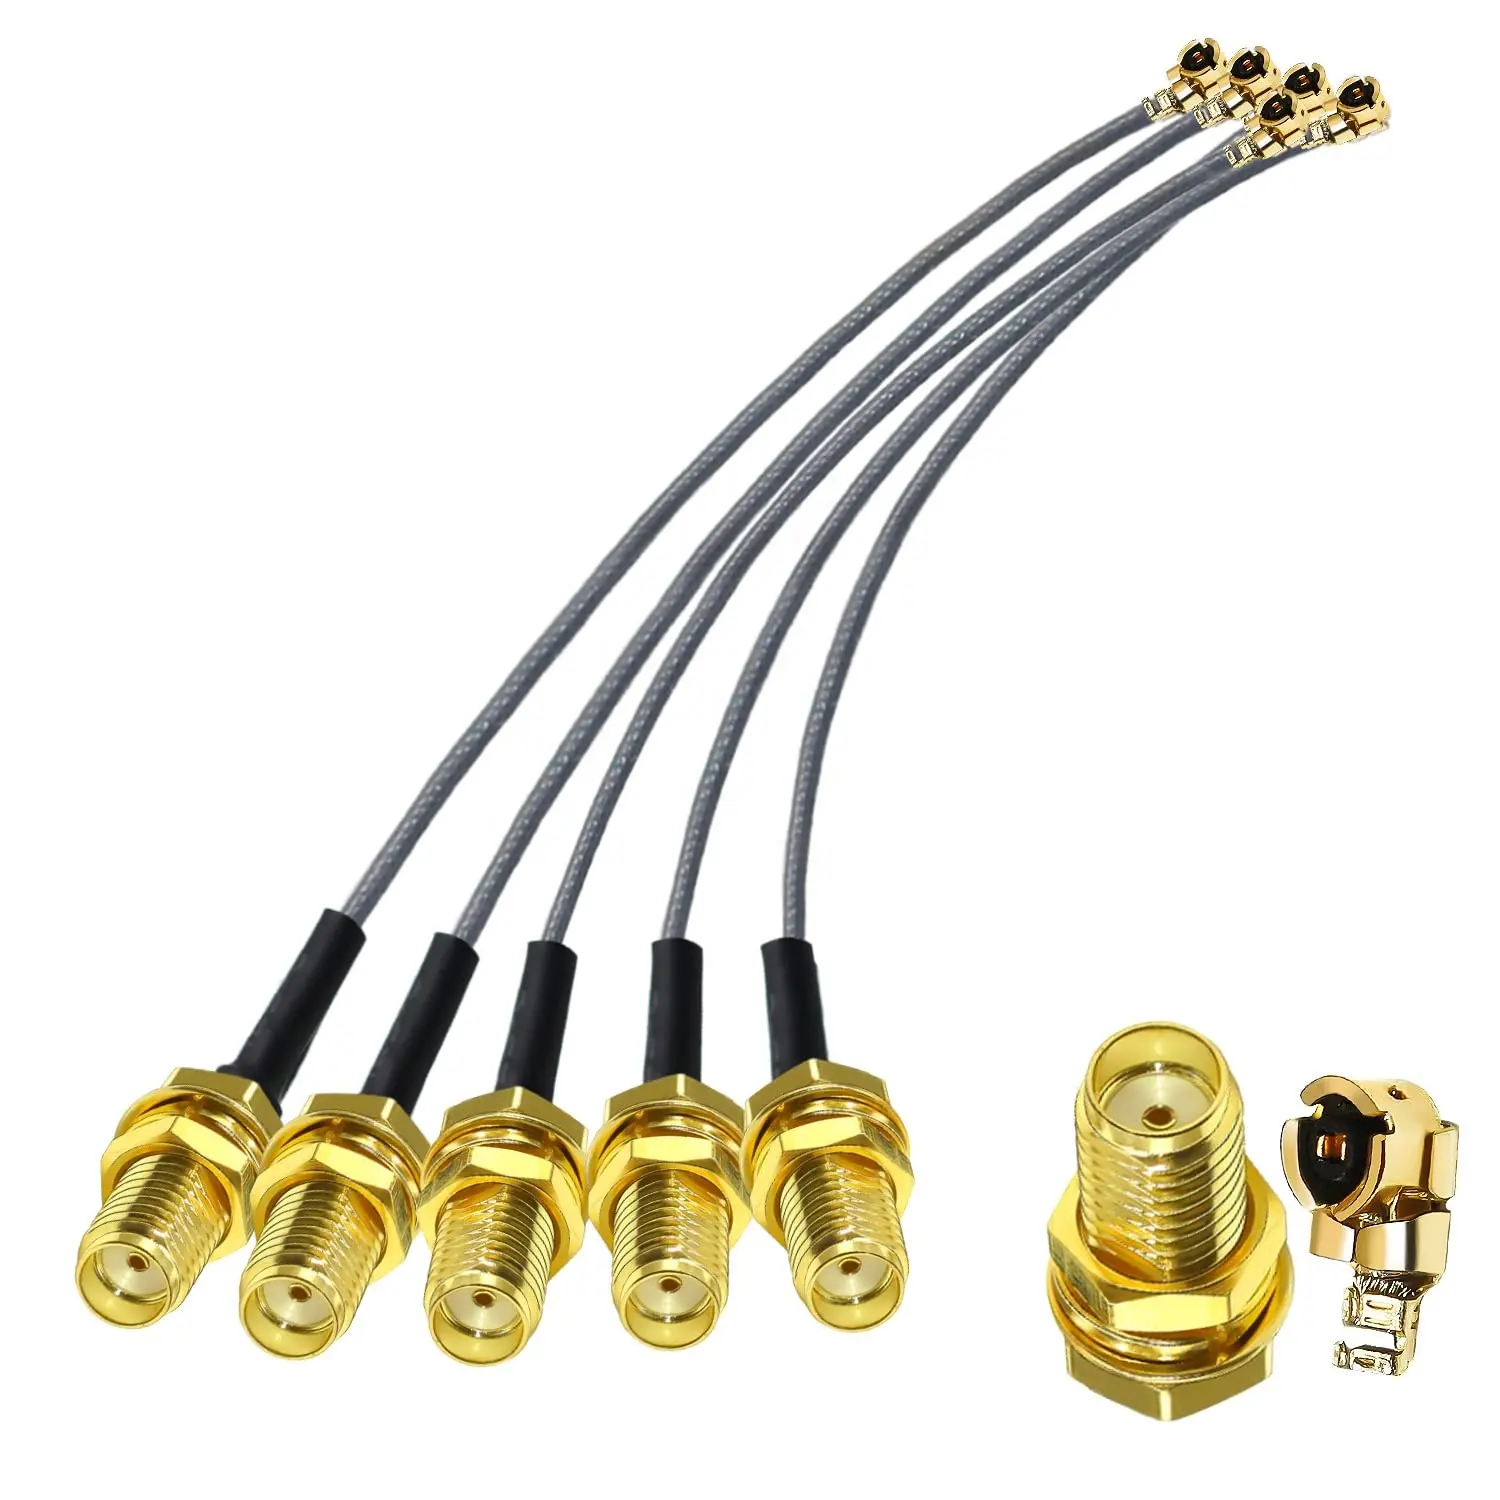 high quality RP-SMA Female Jack to Ipex /UFL /SMA /MMCX/Cuatomized connector 1.13mm RG113 RF communication coaxial cable 15cm